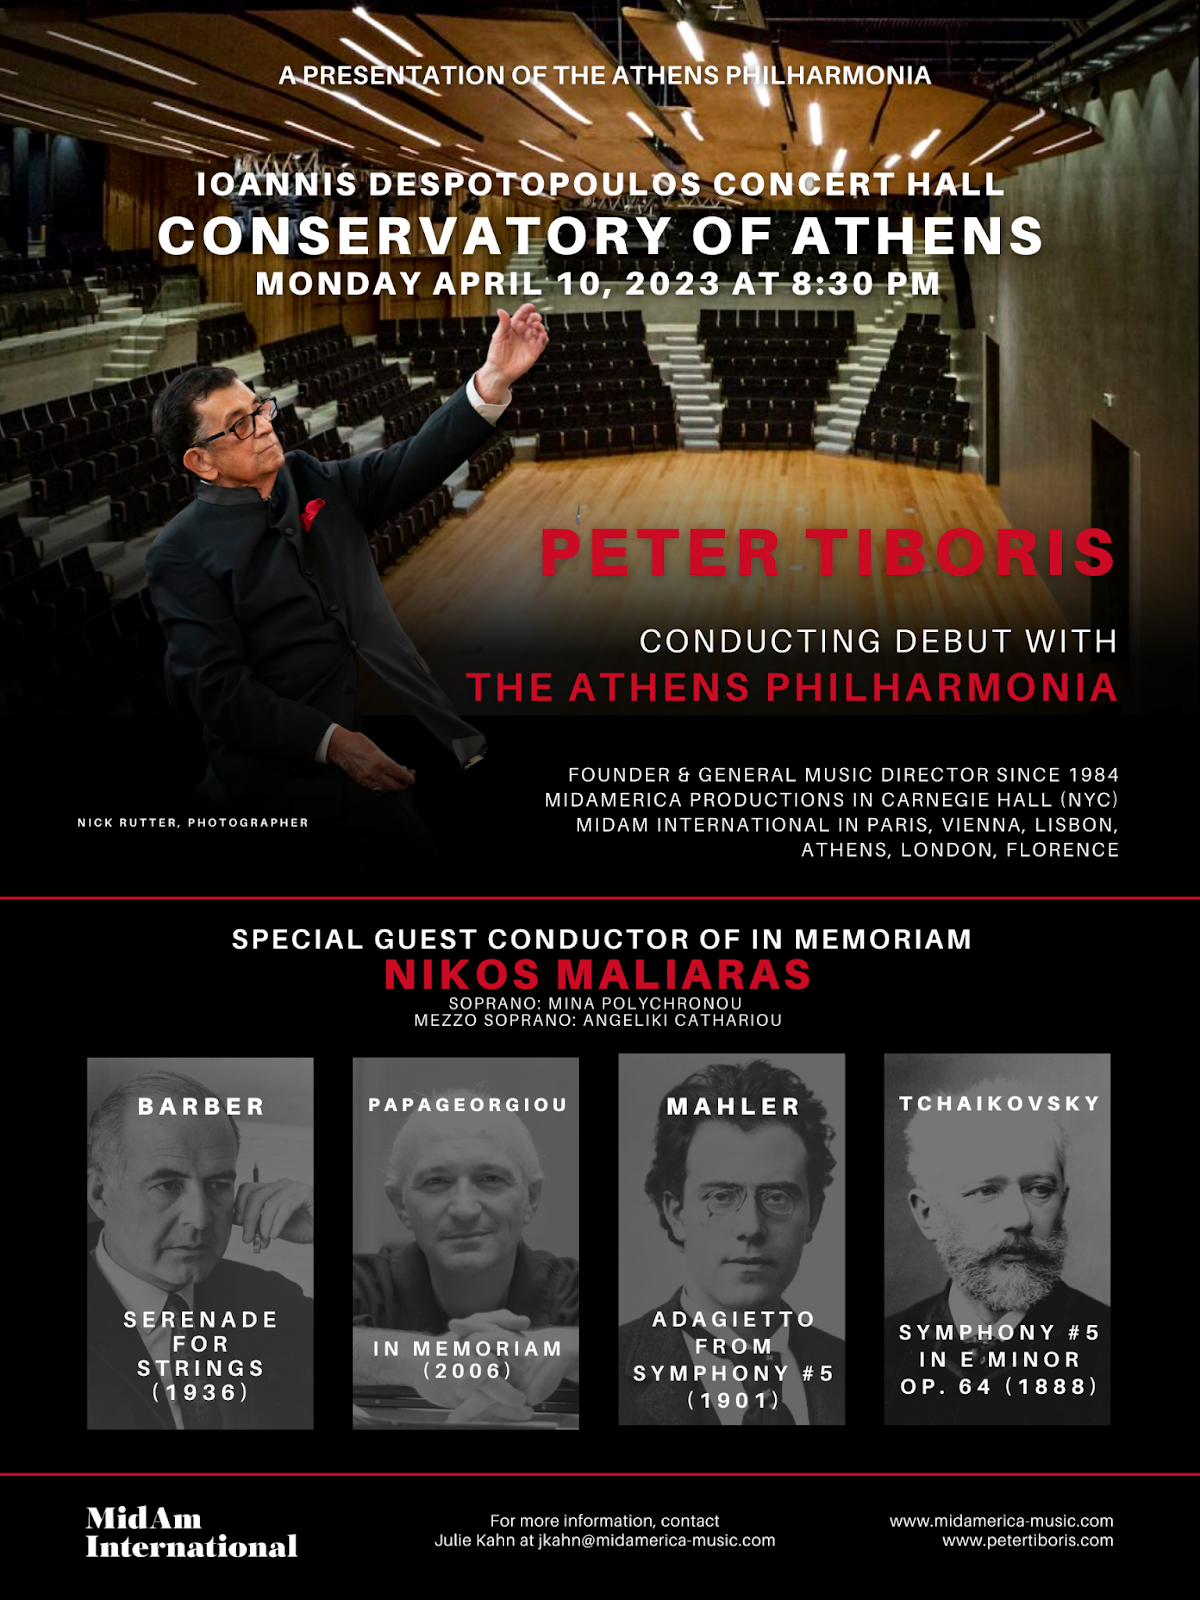 Maestro Peter Tiboris To Lead The Athens Philharmonia Orchestra In A Program Of Contemporary & Classic Works 